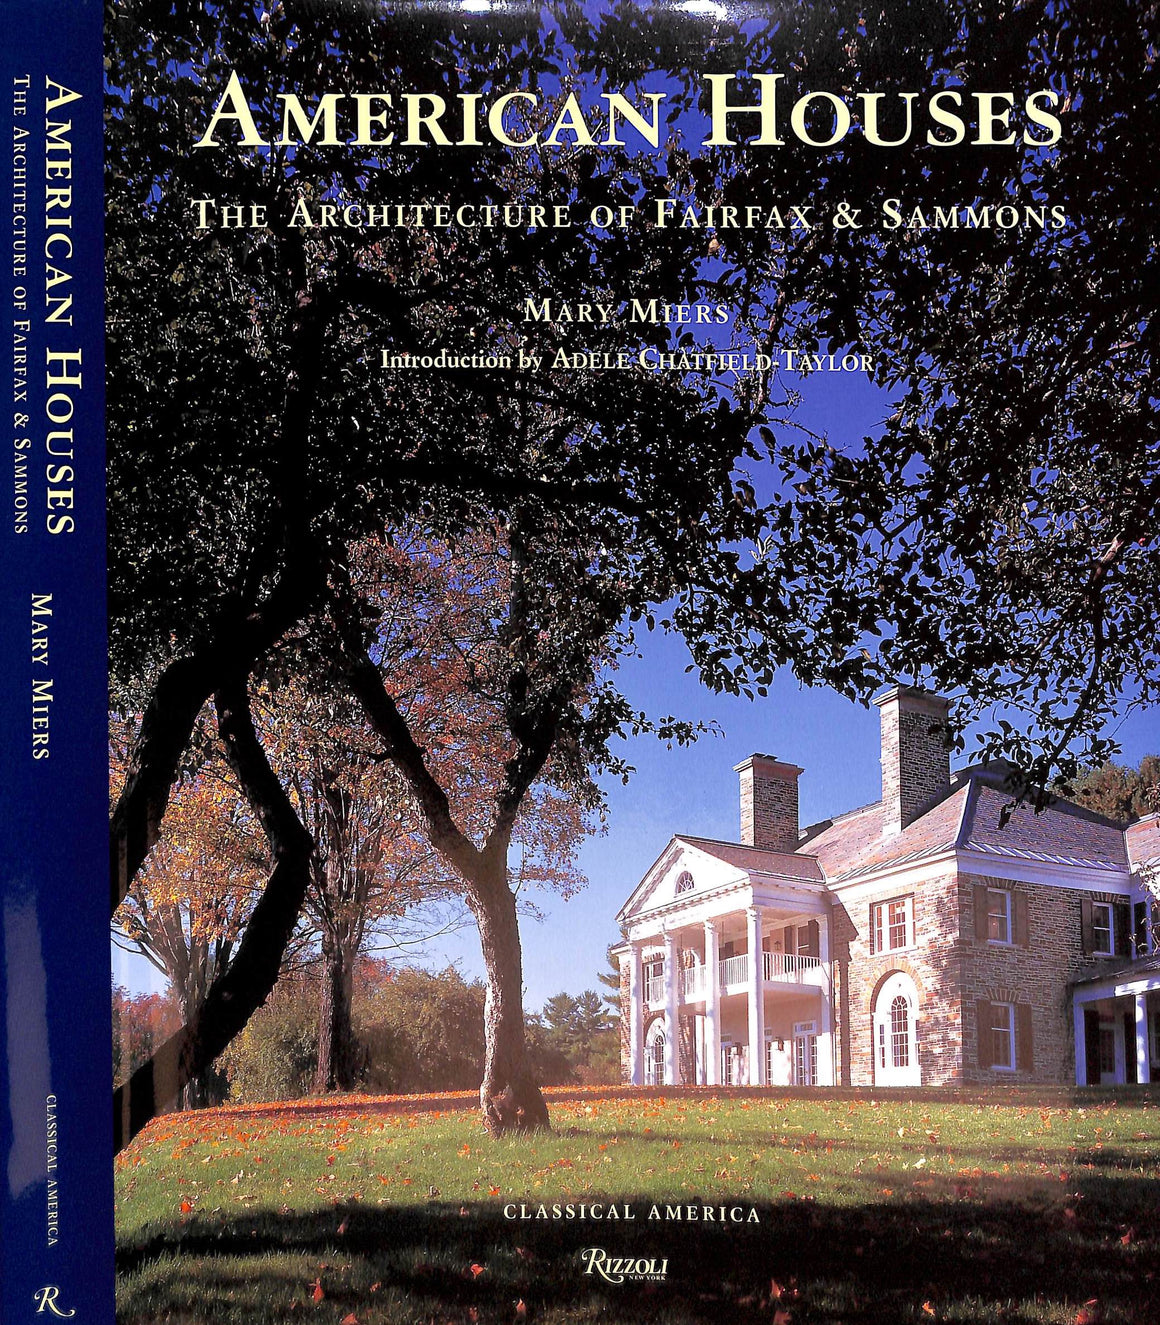 "American Houses: The Architecture Of Fairfax & Sammons" 2006 MIERS, Mary